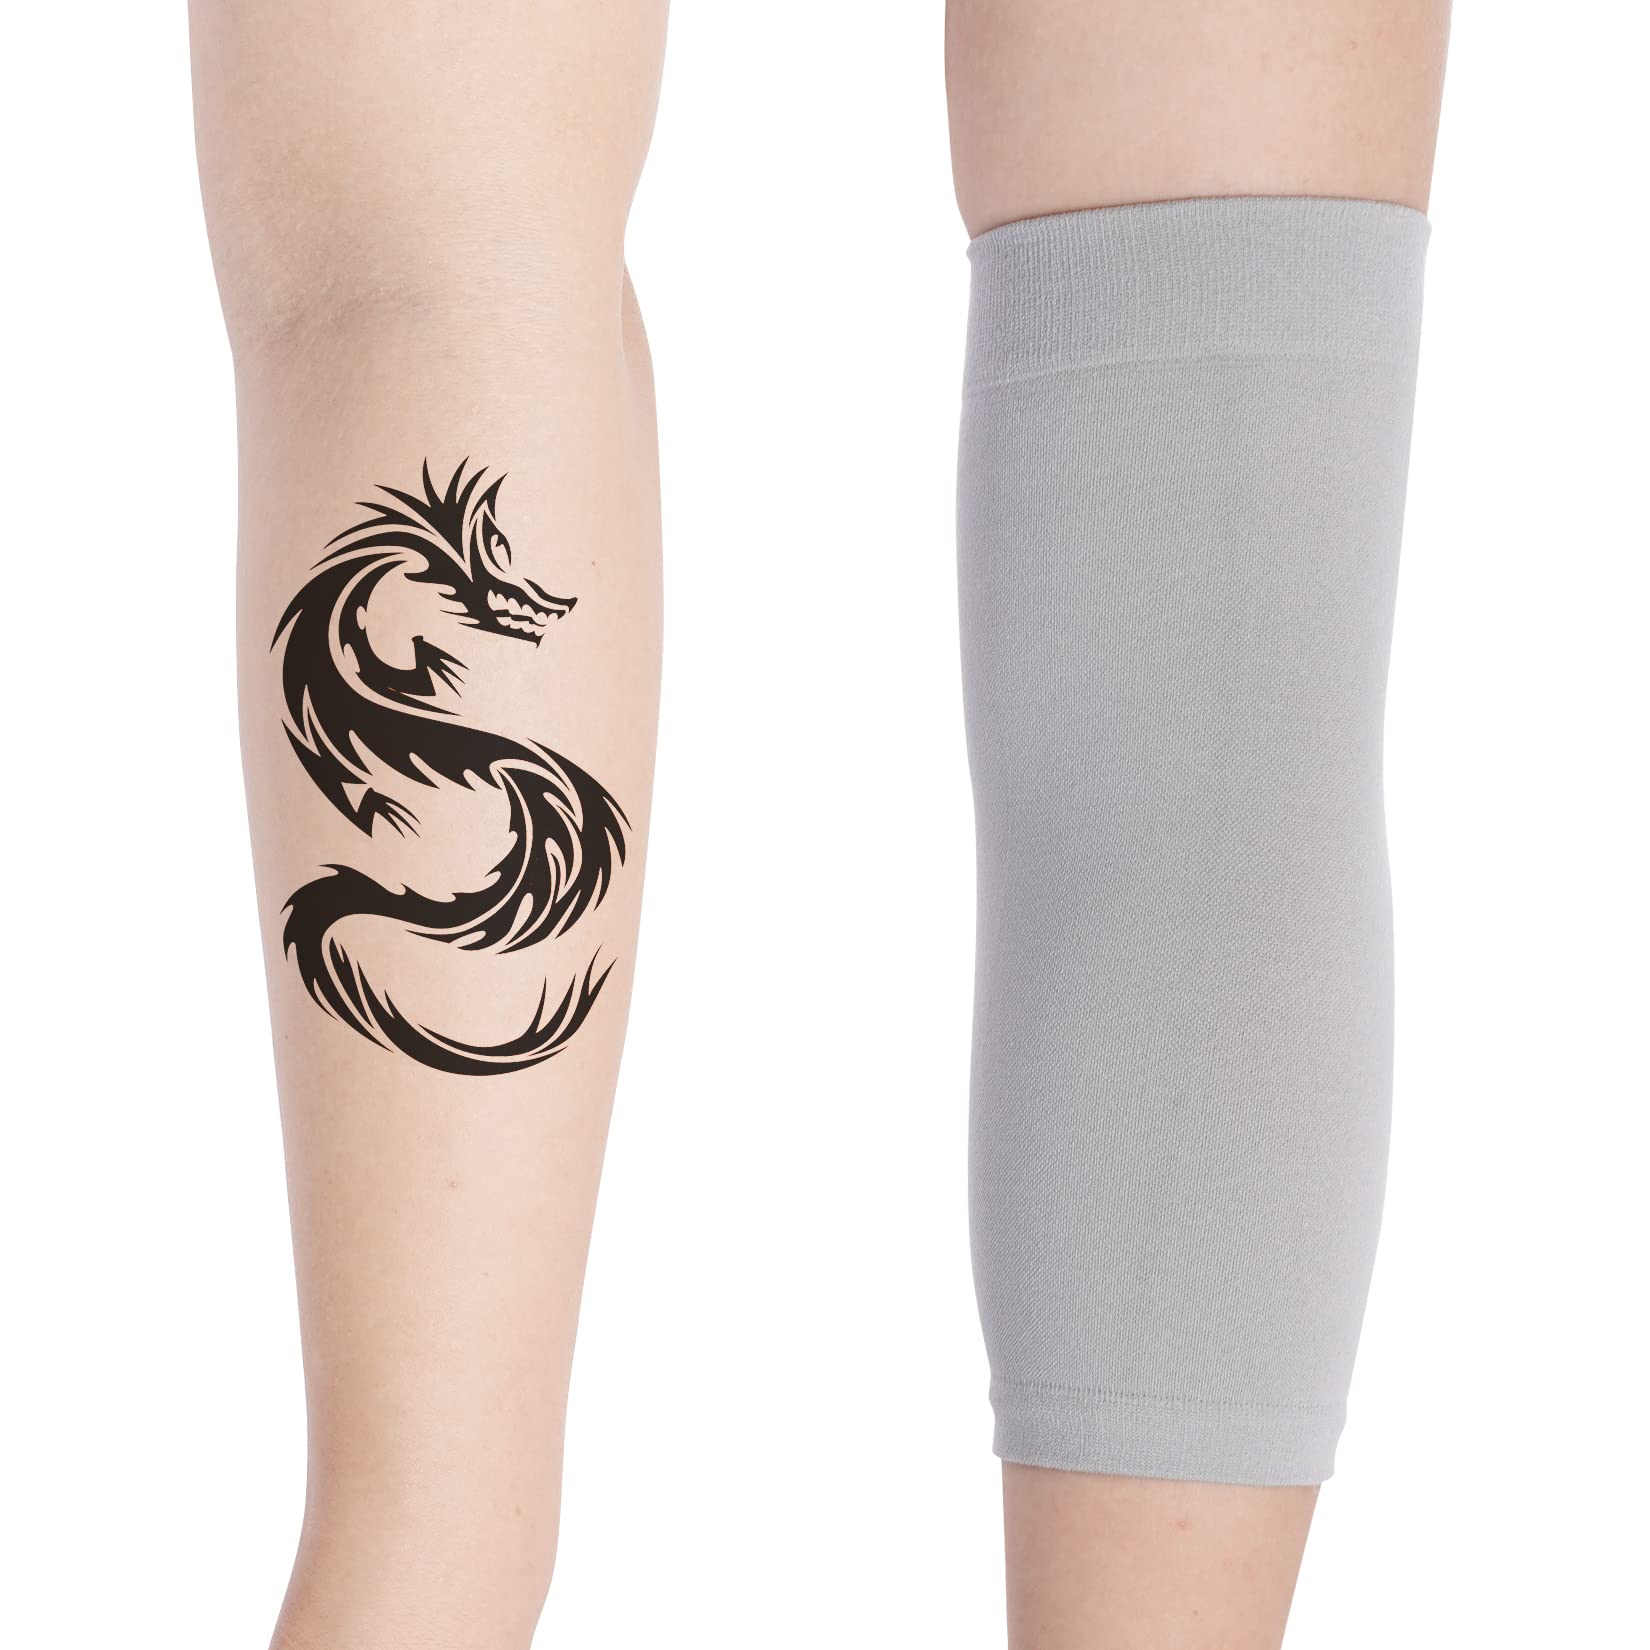 HOVEOX 3 Pairs Tattoo Cover Up Sleeve Forearm Tattoo Cover Tattoo Cover Up Compression Sleeves Arm Sleeves for Women Men